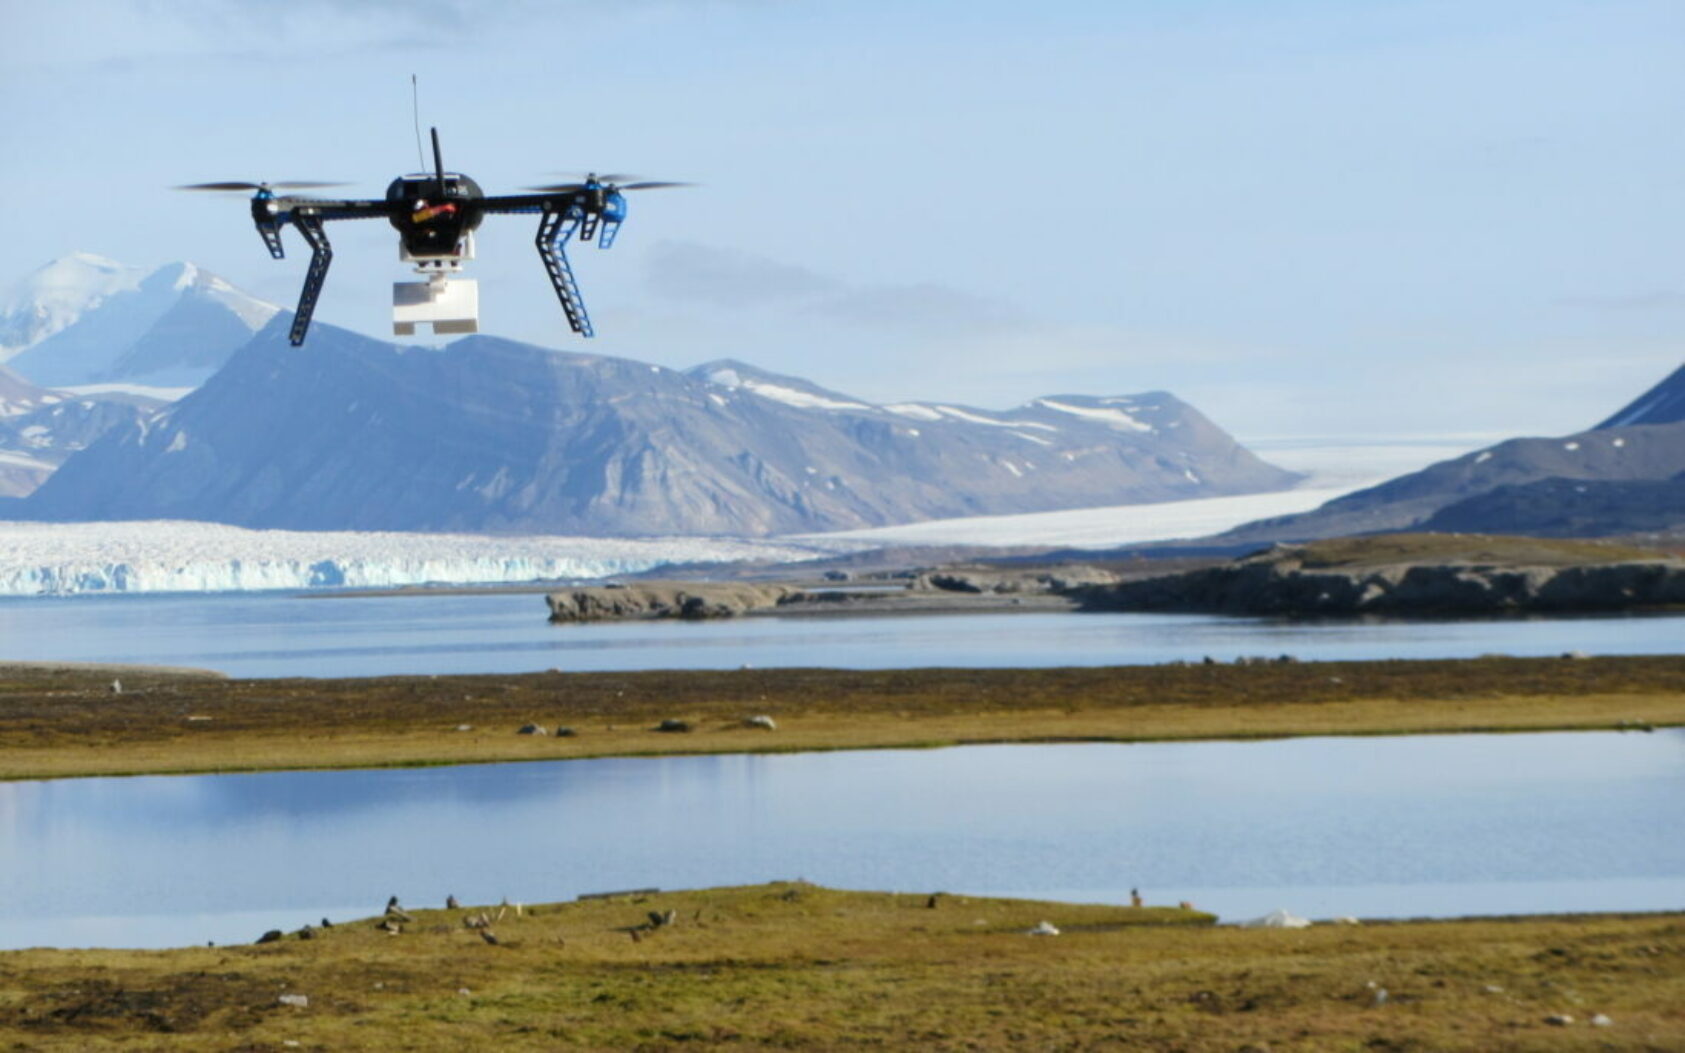 Rune Storvold, NORCE, Drone operation in Ny-Ålesund, Svalbard., Drone ny aalesud 1019 foto Storvold eng NORCE, , 